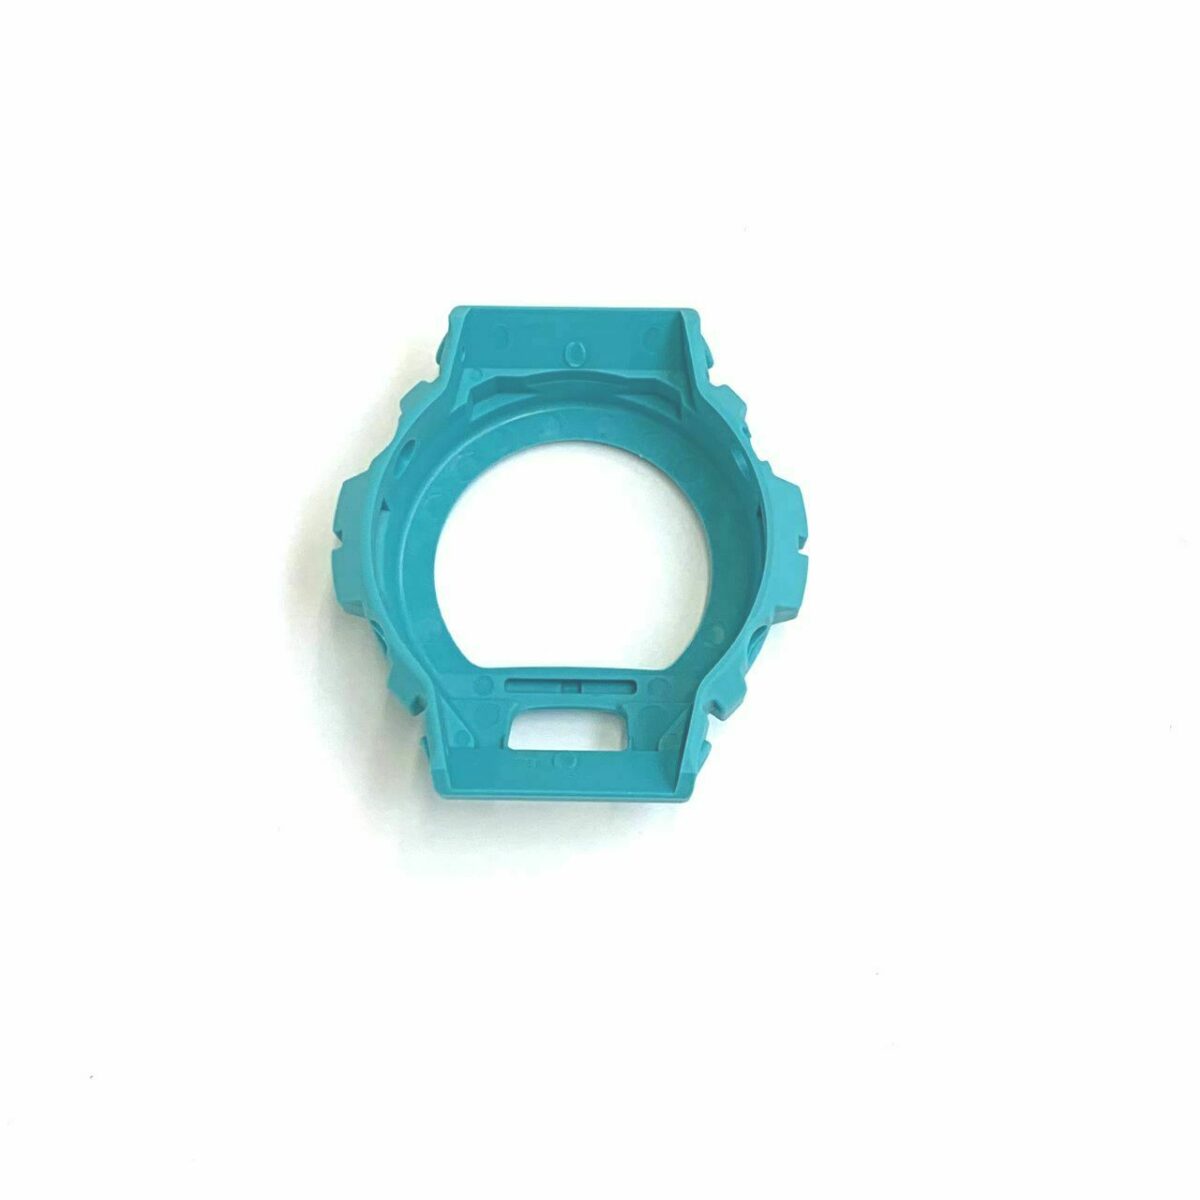 Genuine Casio Watch Bezel Teal Blue White Text 10392523 for DW 6900 DW 6900SN 3 193877495719 2 - Maddisons UK